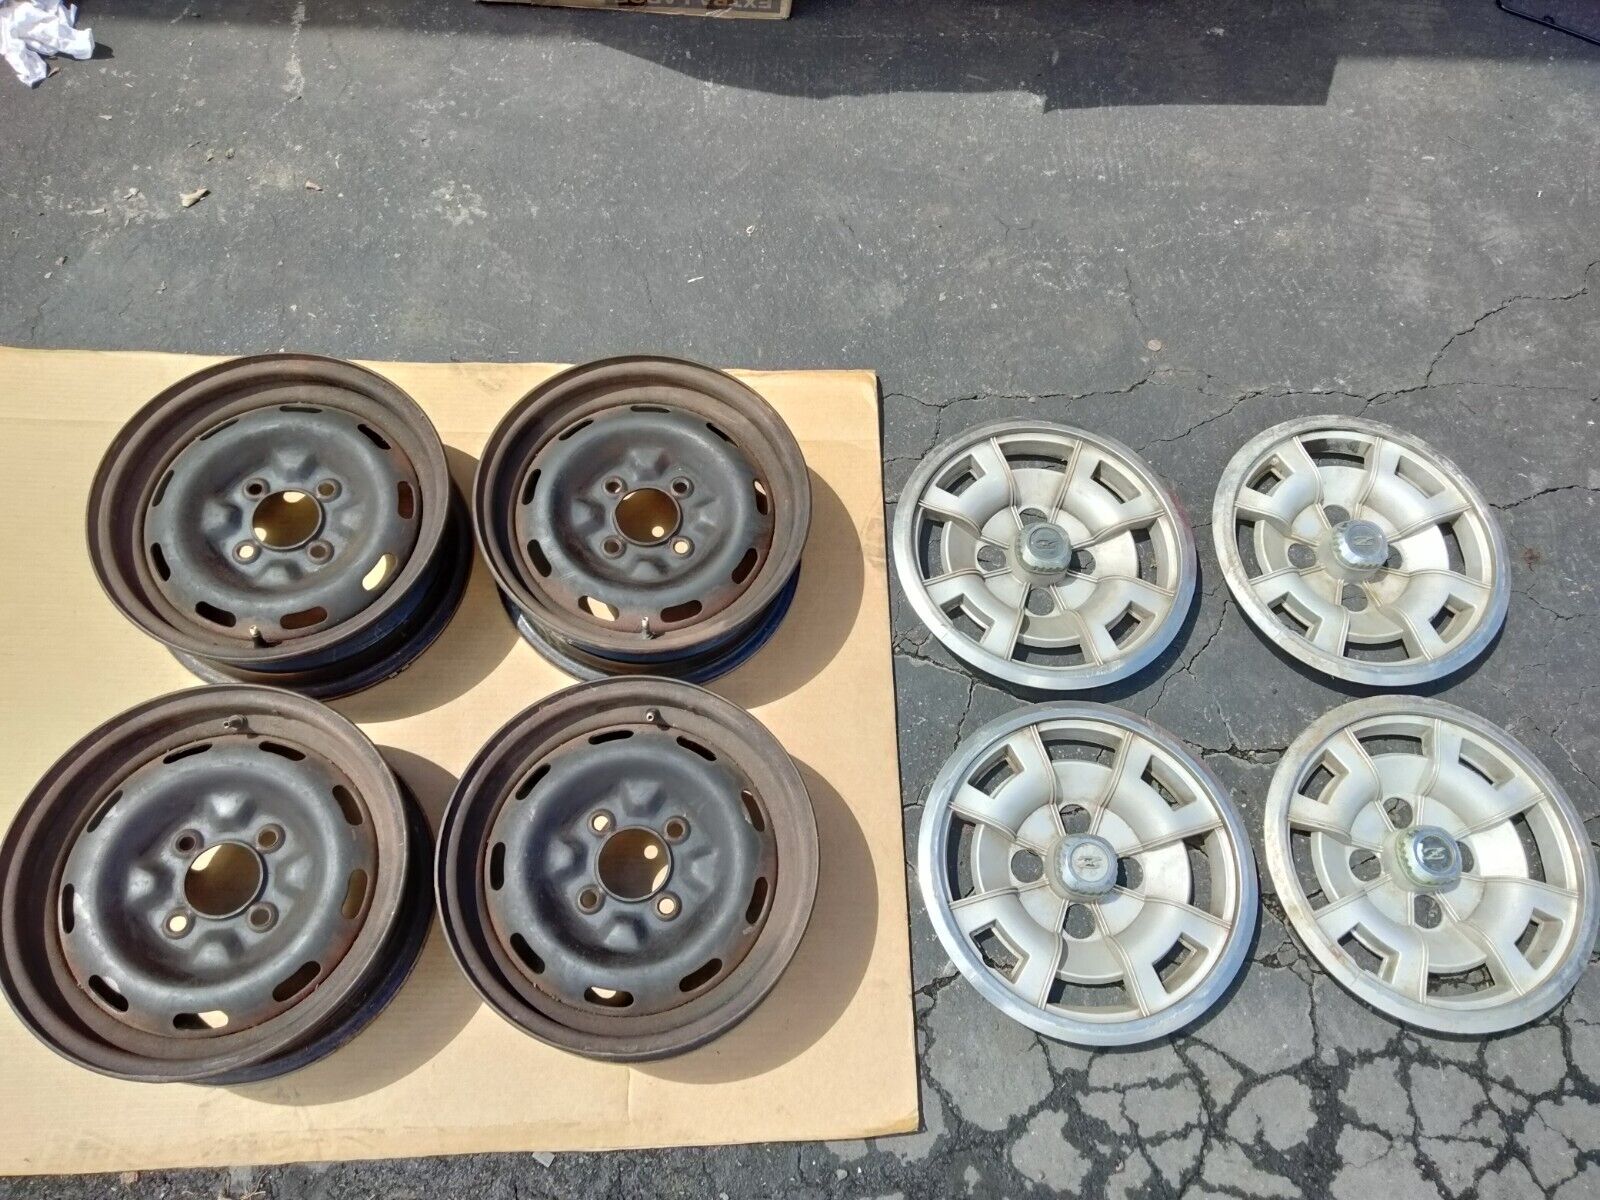 (4) Factory OEM Datsun 280z TOPY Wheels Dated 5-76 (All 4), Free Wheel Covers